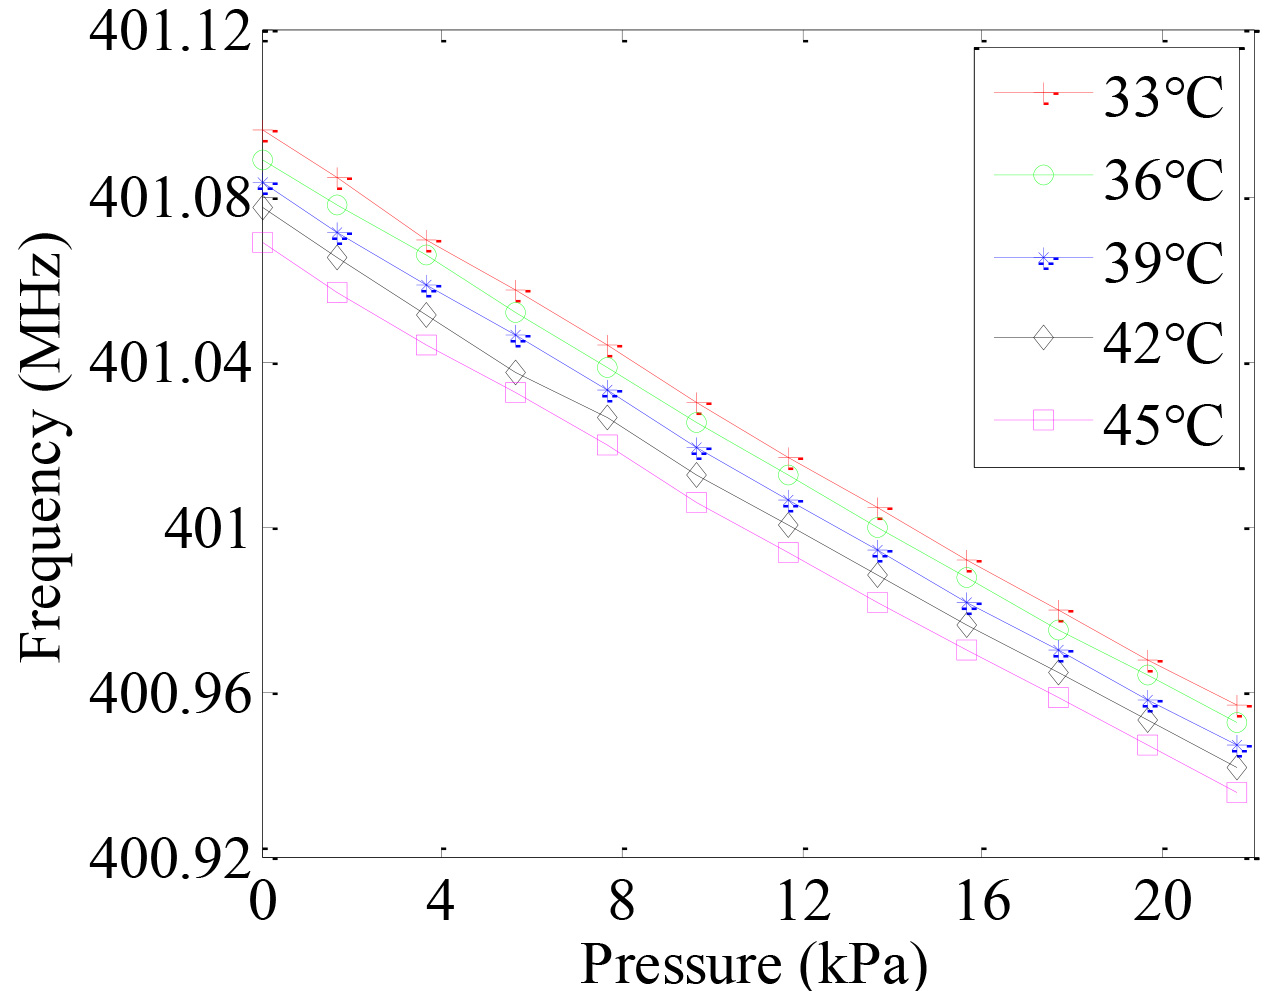 Relationship between pressure and frequency of Resonator1 under different temperature.